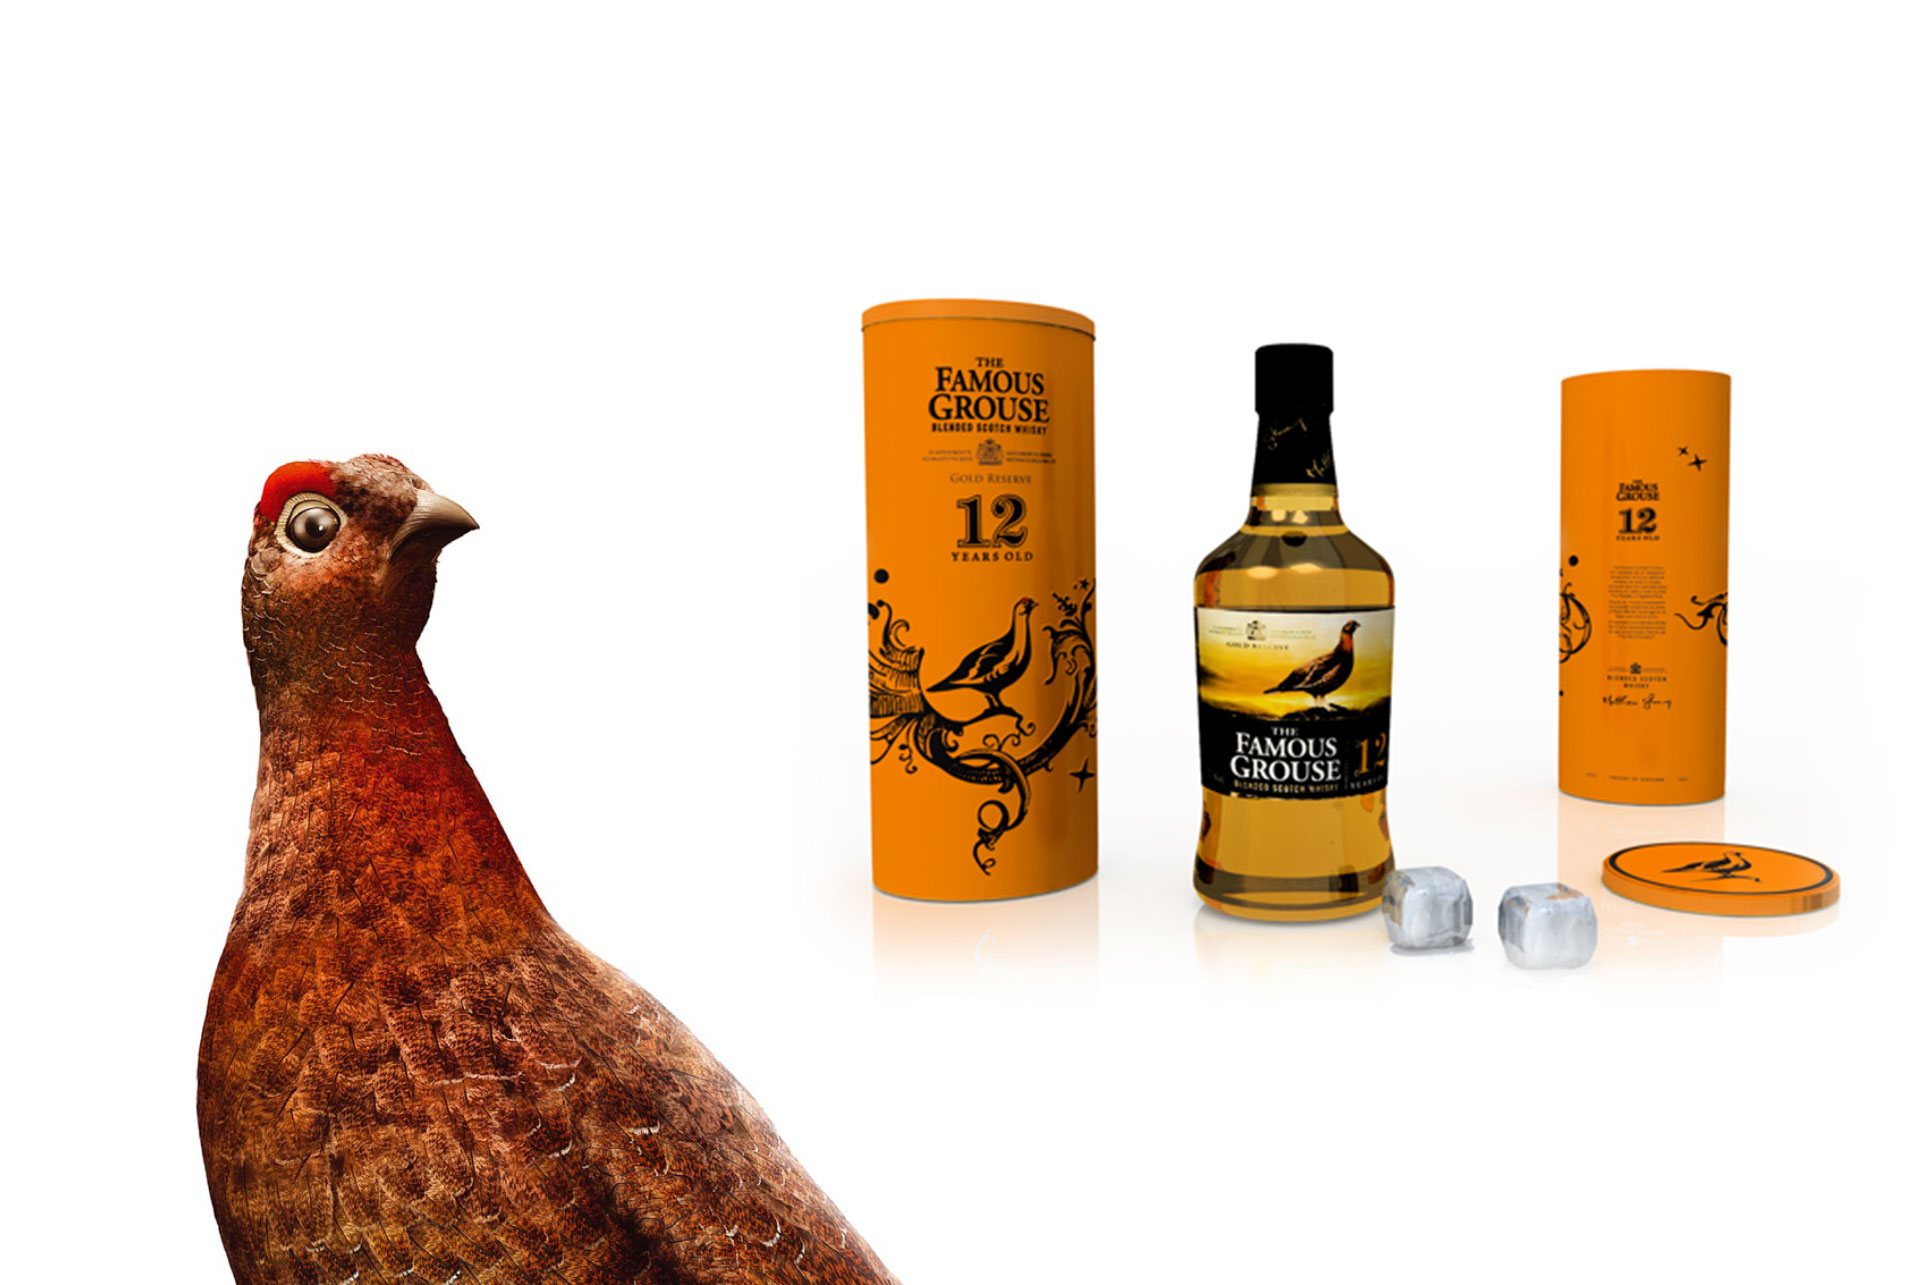 The Famous Grouse